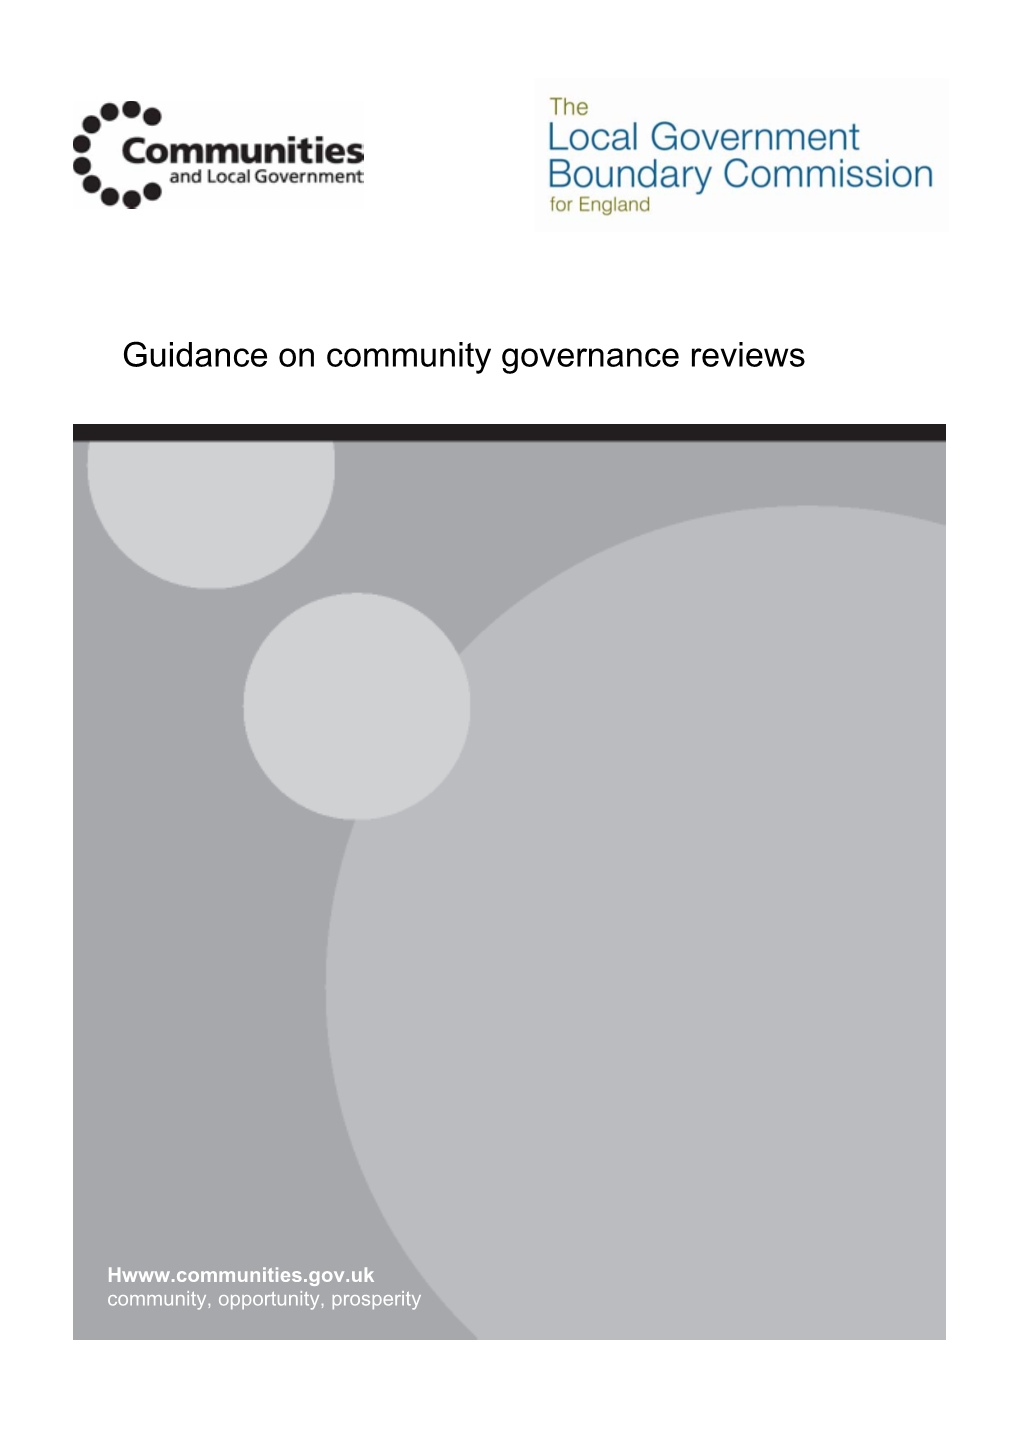 Guidance on Community Governance Reviews